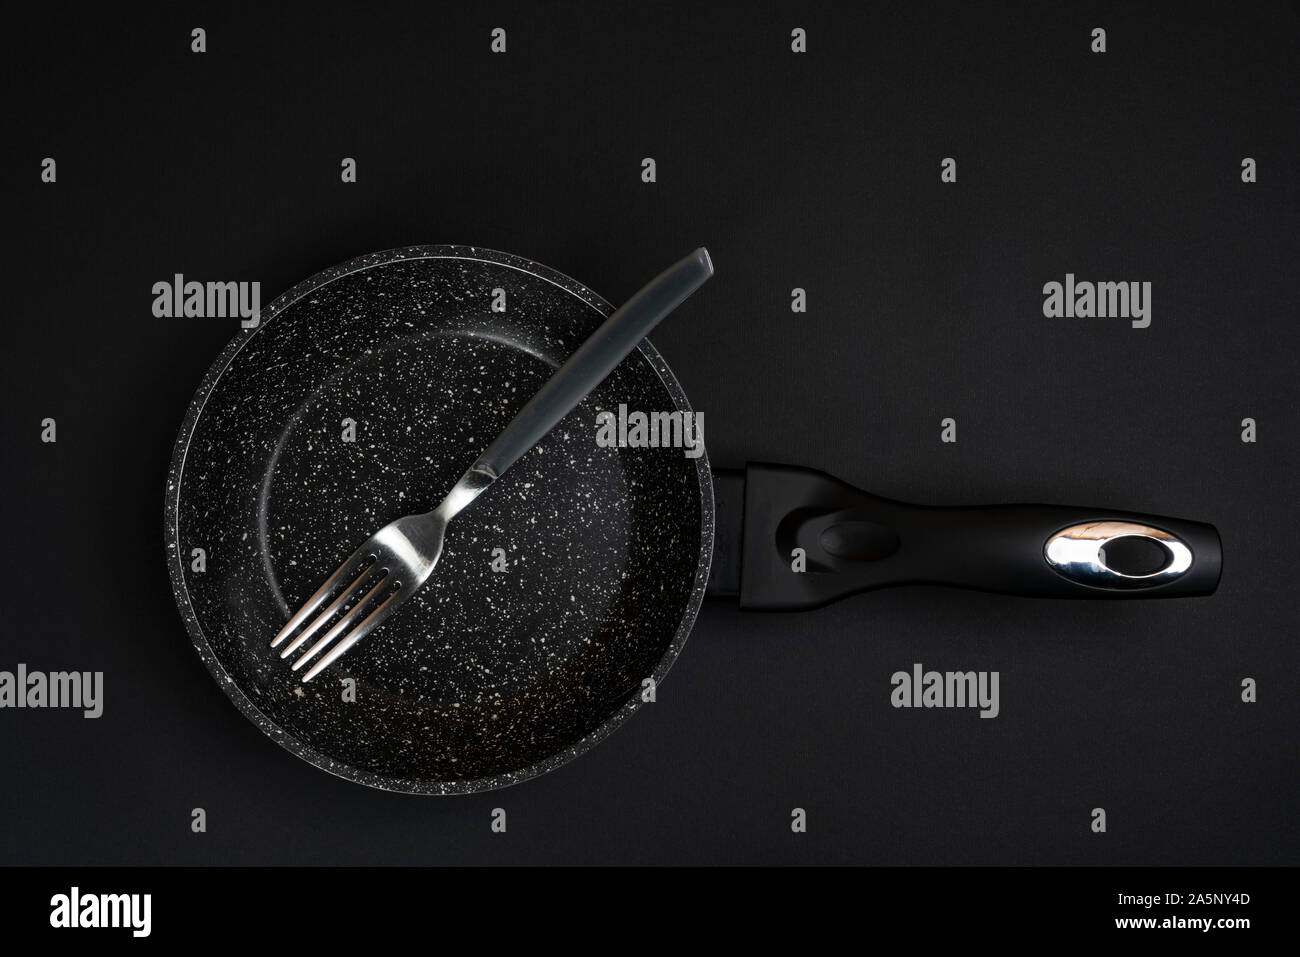 a fork in a pan on a black surface Stock Photo